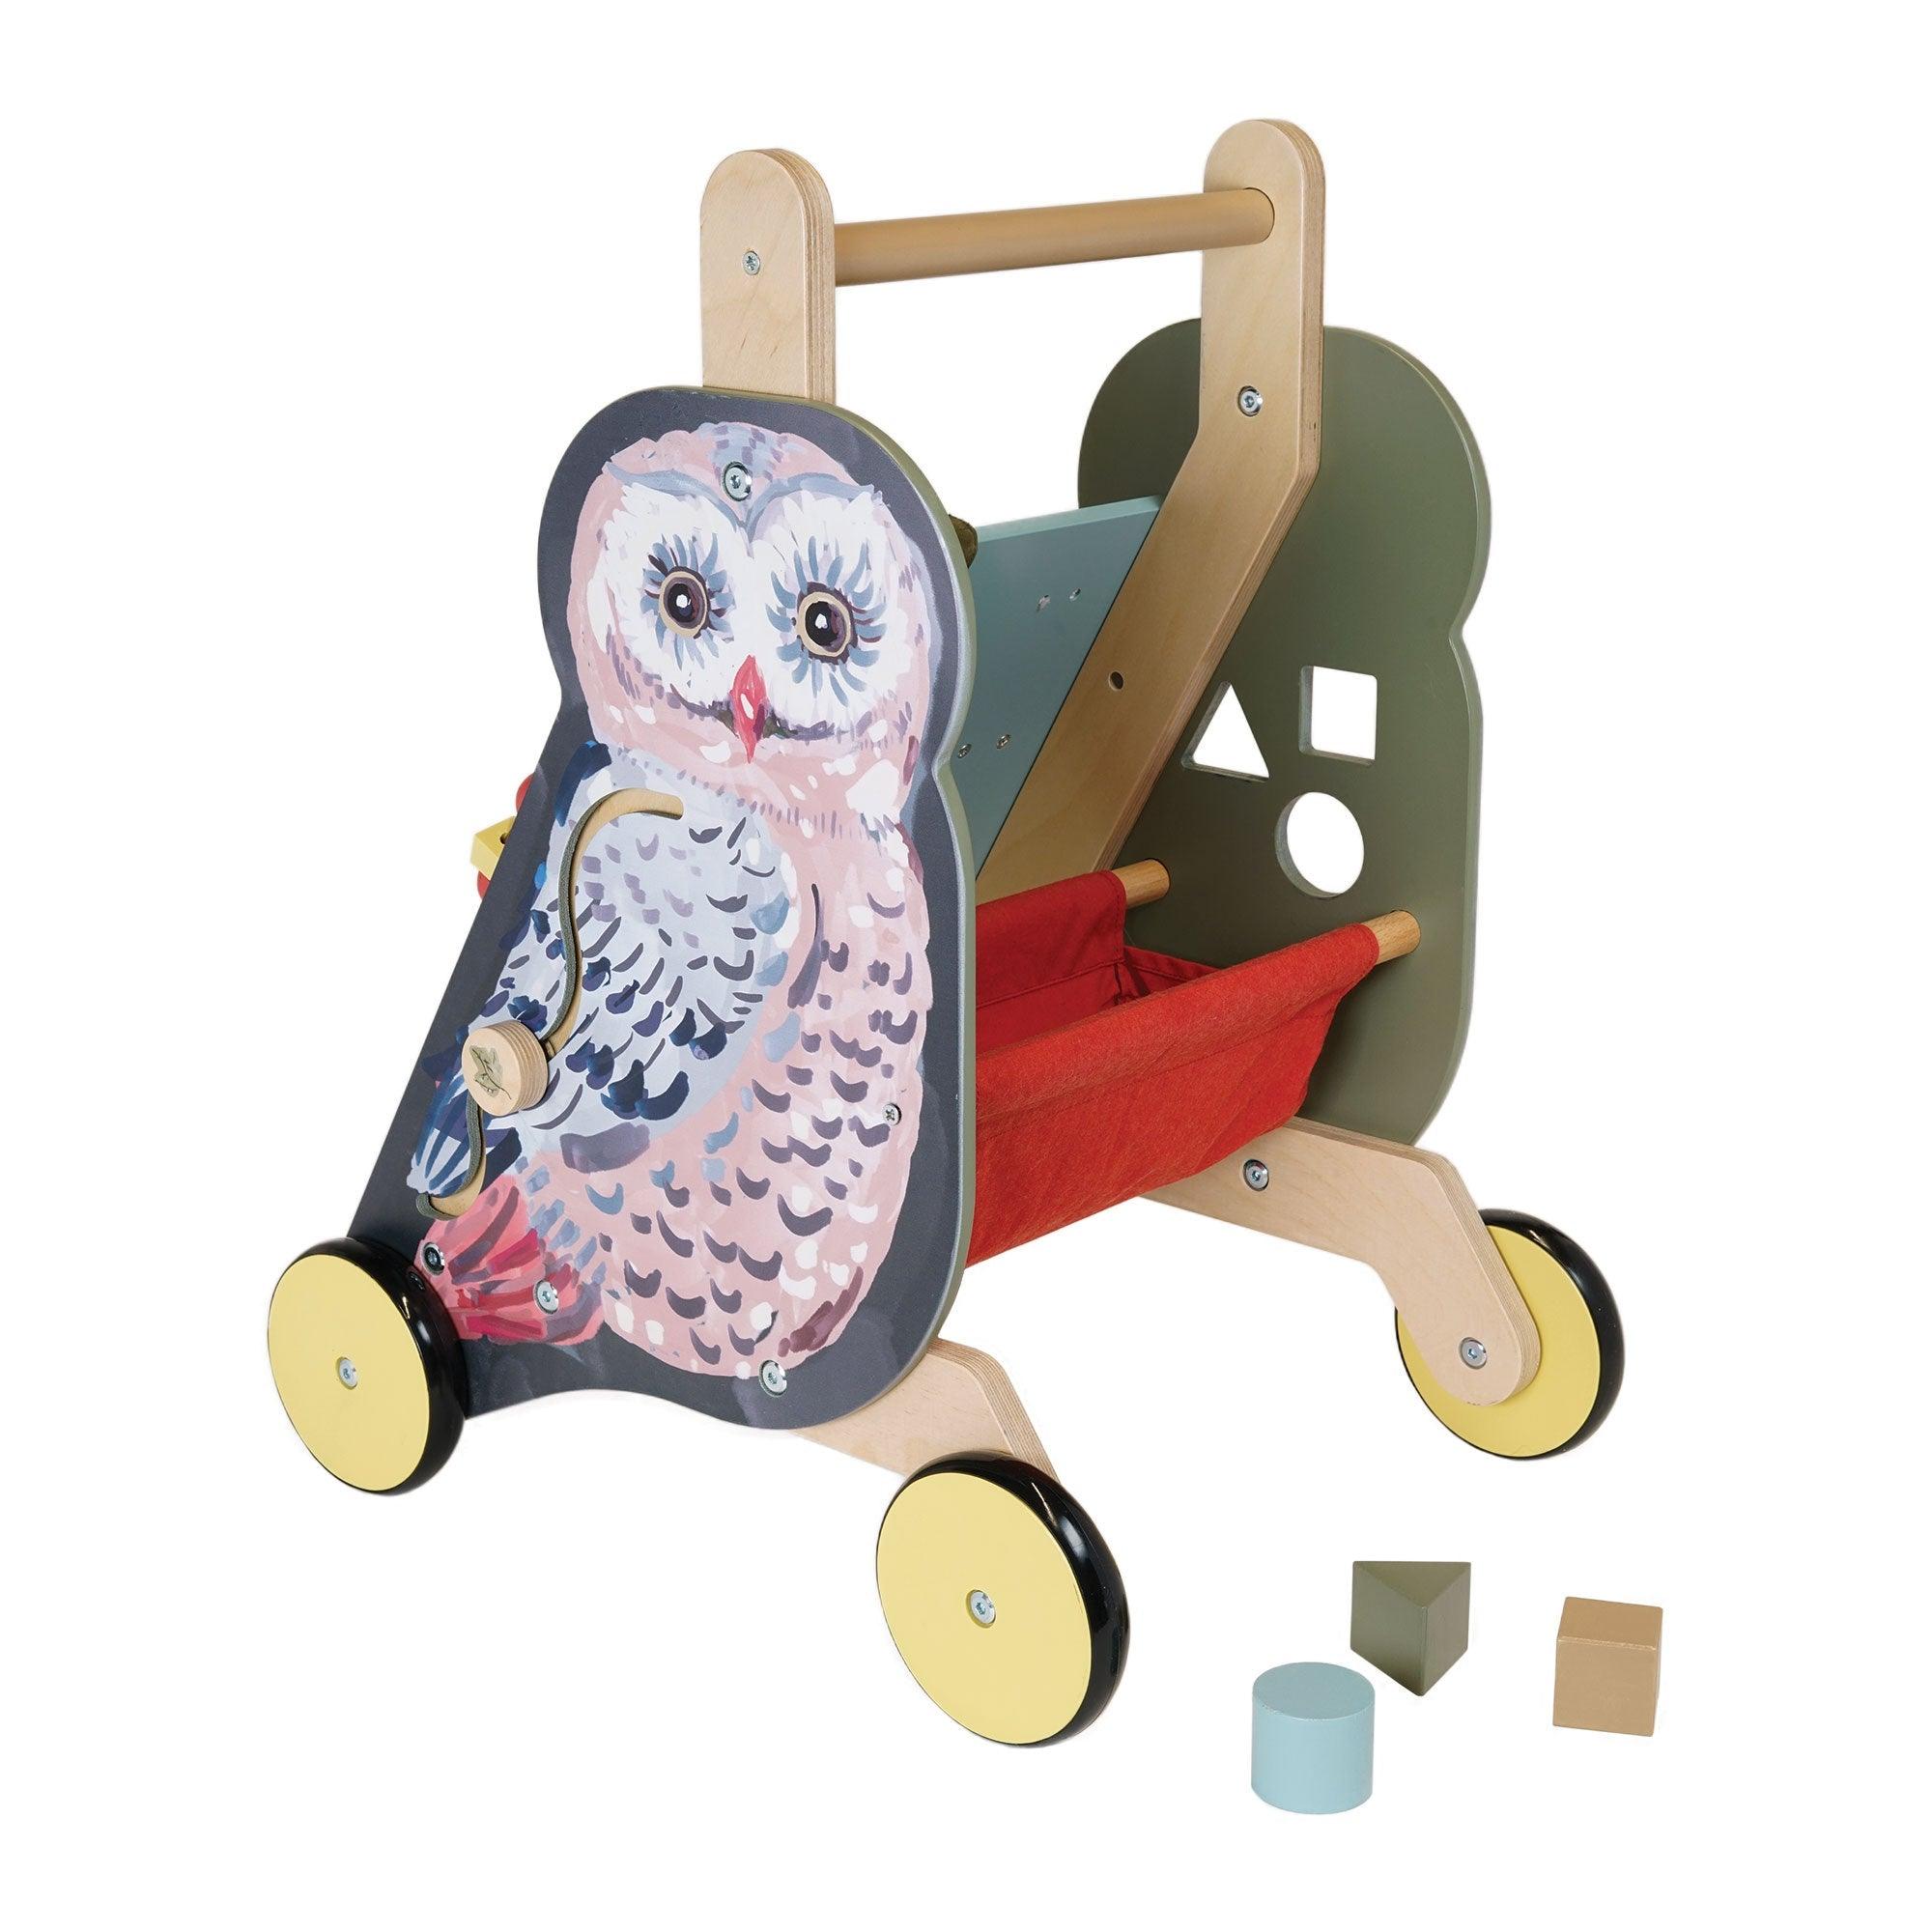 Wildwoods Owl Push-Cart - Why and Whale